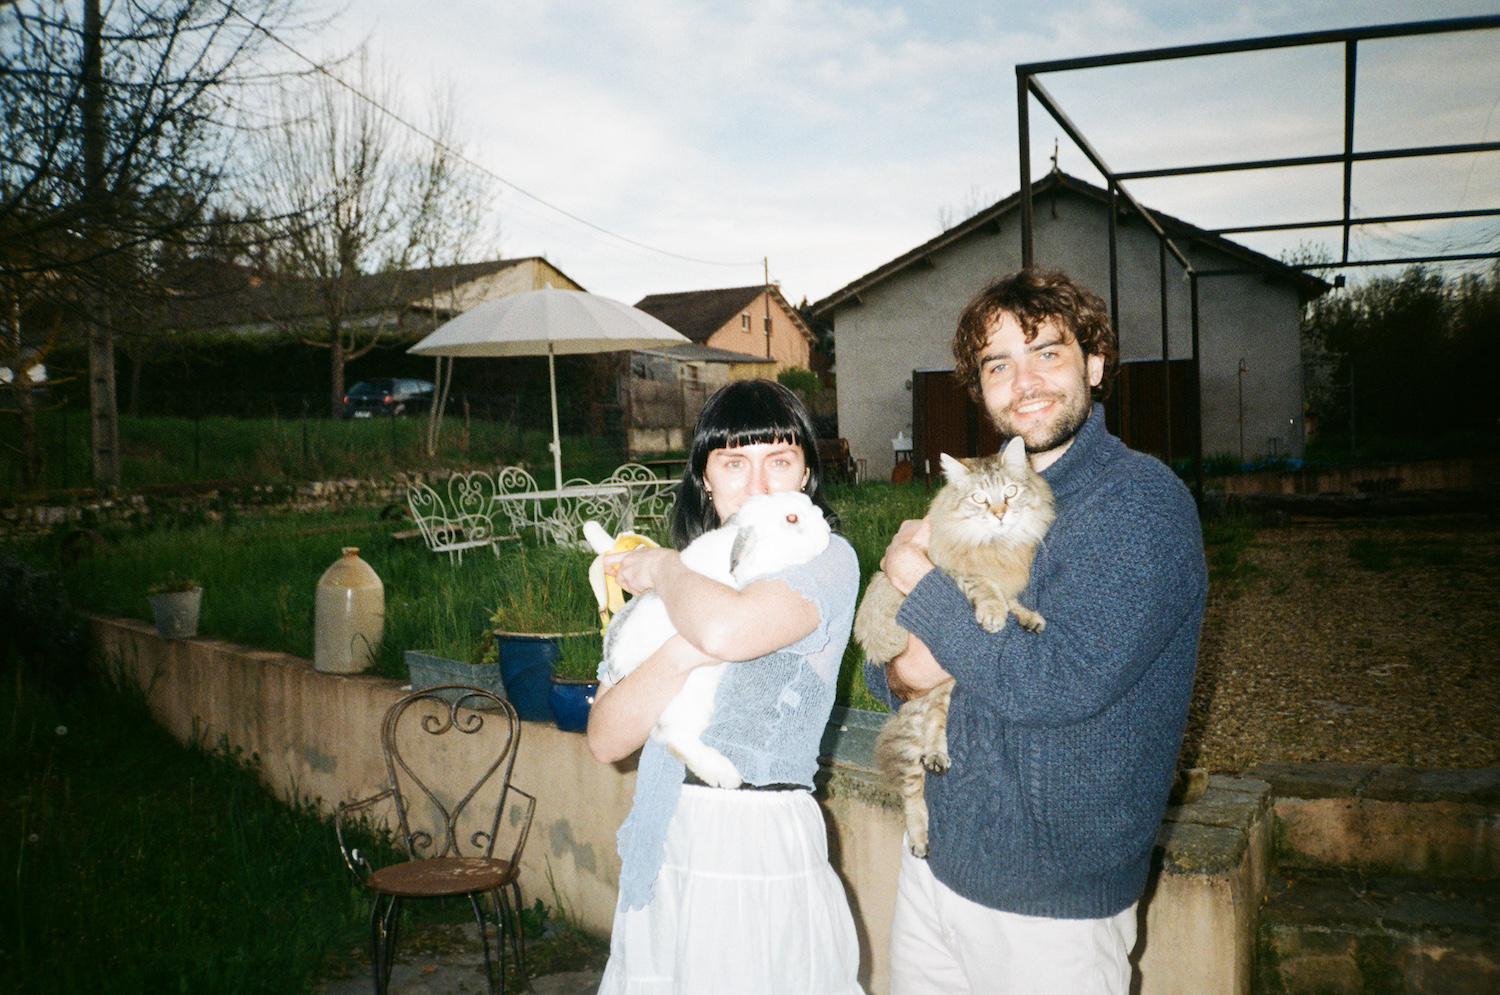 Tahney and Reece holding a rabbit called Enzo and a cat called Maahs in front of the Mill, where you can see garden furniture and the workshop in the background